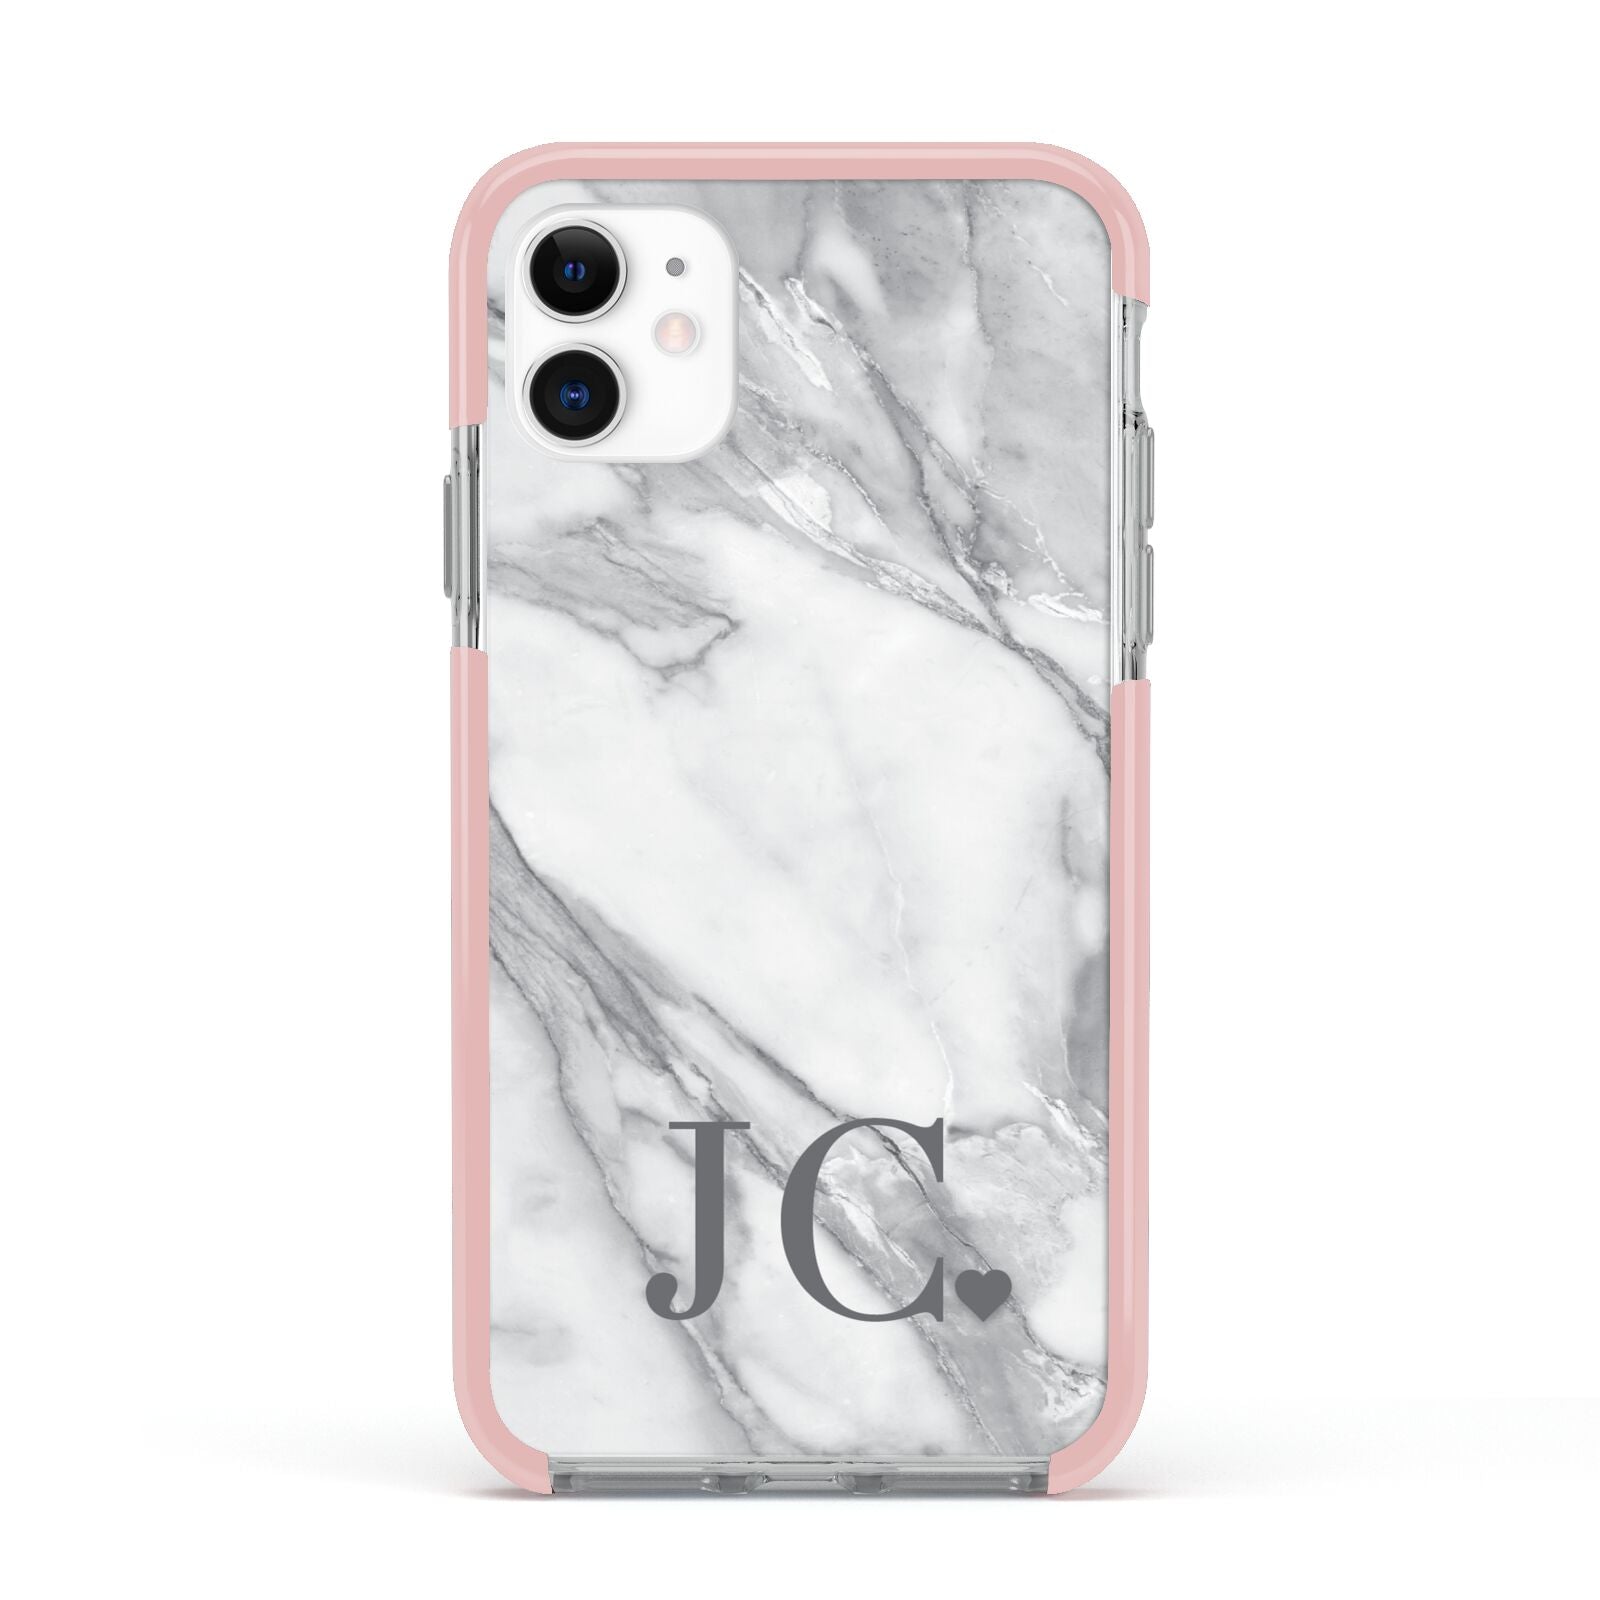 Initials Love Heart Apple iPhone 11 in White with Pink Impact Case